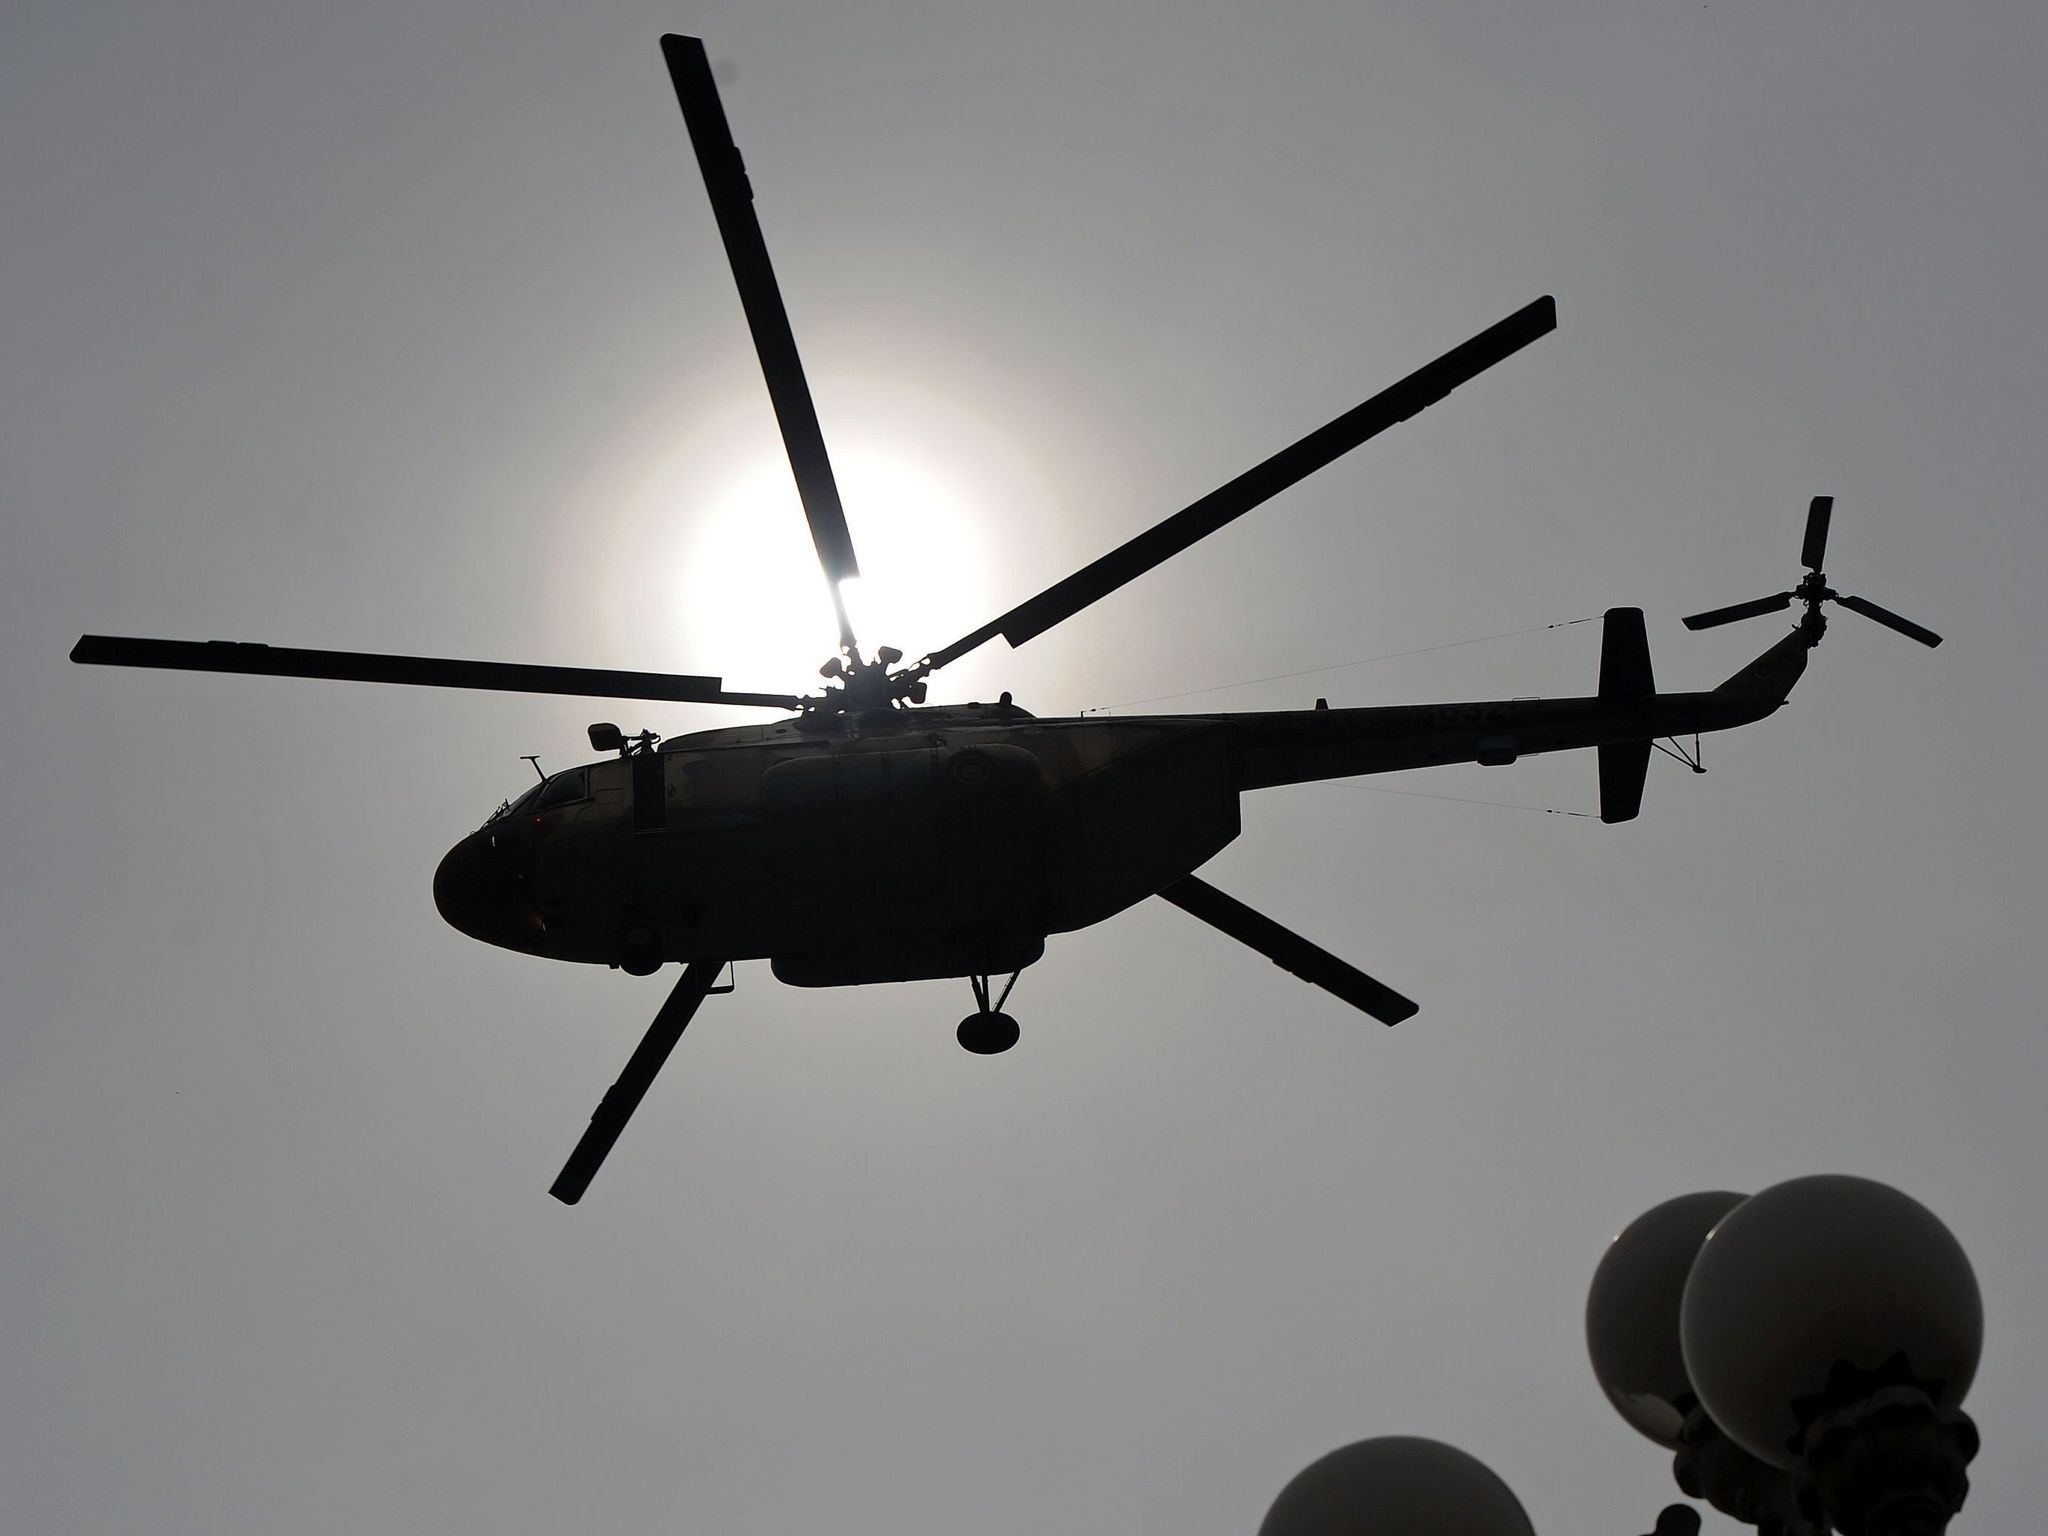 This file photo taken on March 23, 2014 shows a Pakistani Air Force Mi-17 helicopter flies over the Presidential Palace during a parade marking the country's National Day in Islamabad. (AFP Photo)